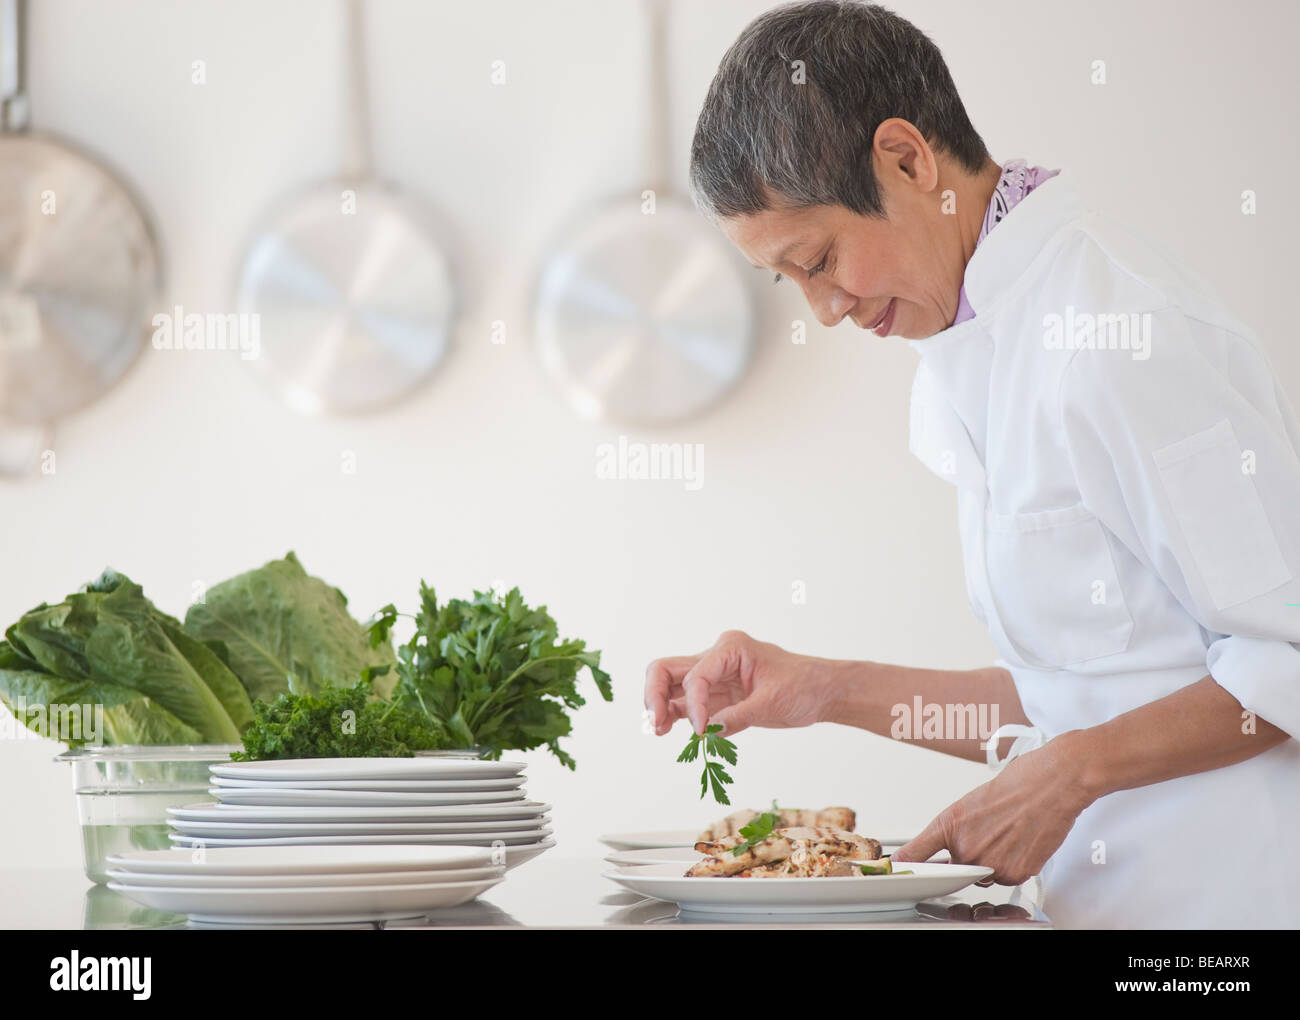 Chinese chef plating meals in professional kitchen Stock Photo